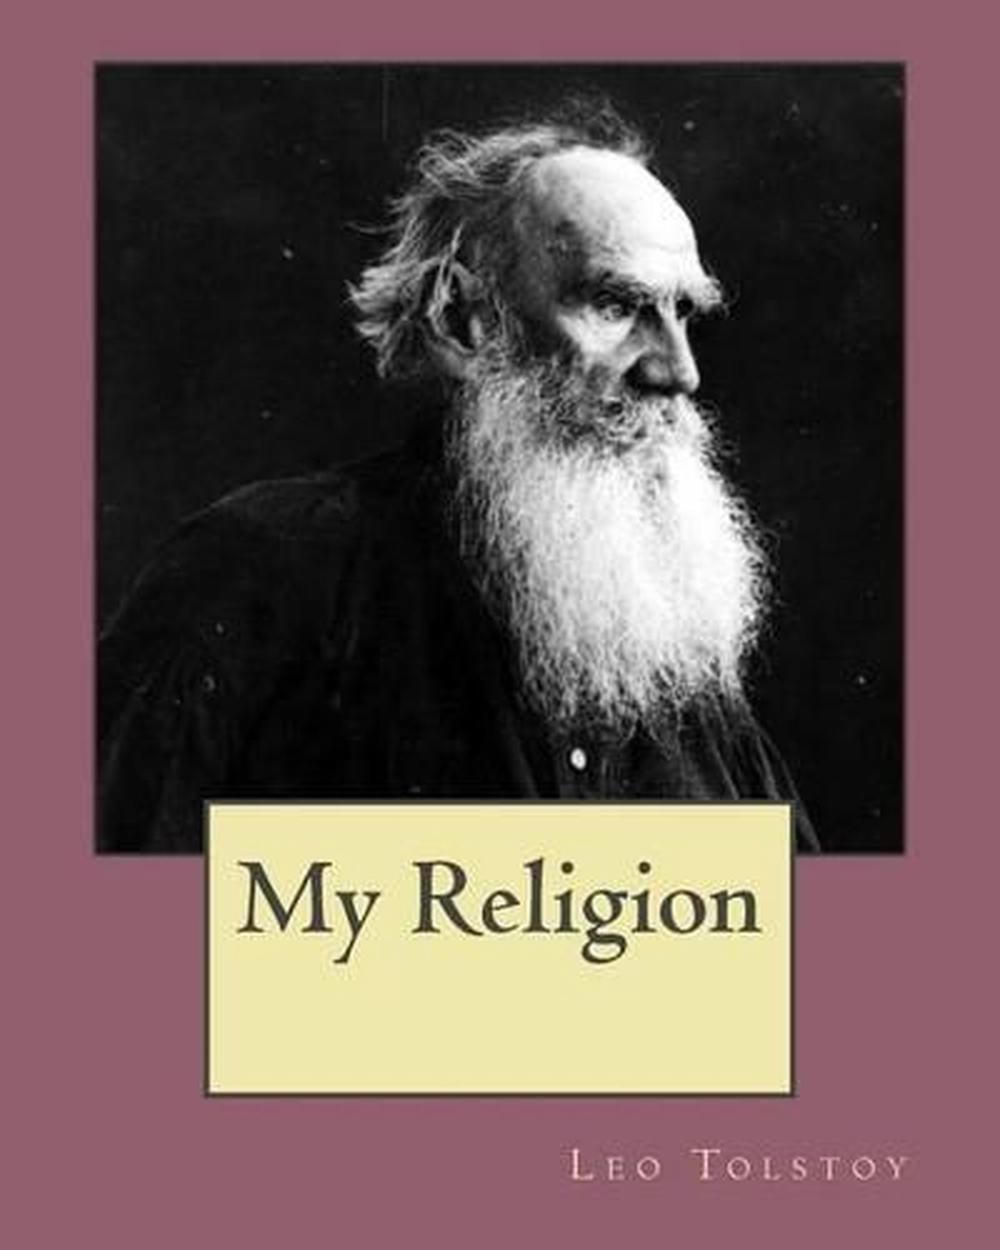 My Religion by MR Leo Tolstoy (English) Paperback Book Free Shipping